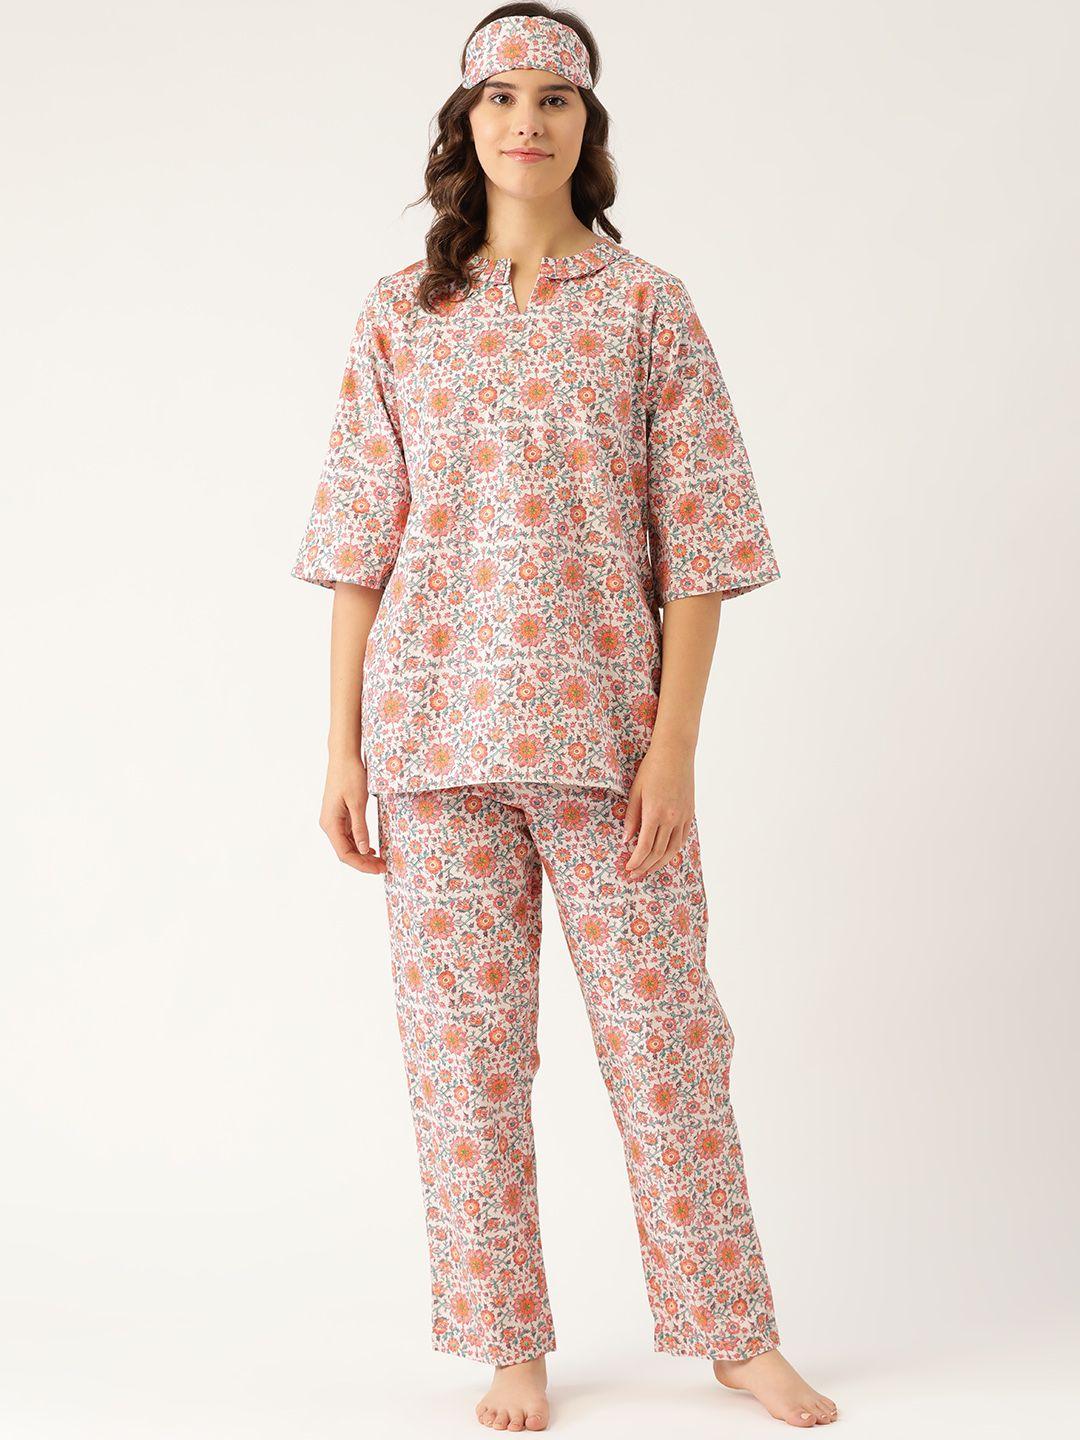 rapra the label women white & pink cotton floral printed night suit with an eye mask